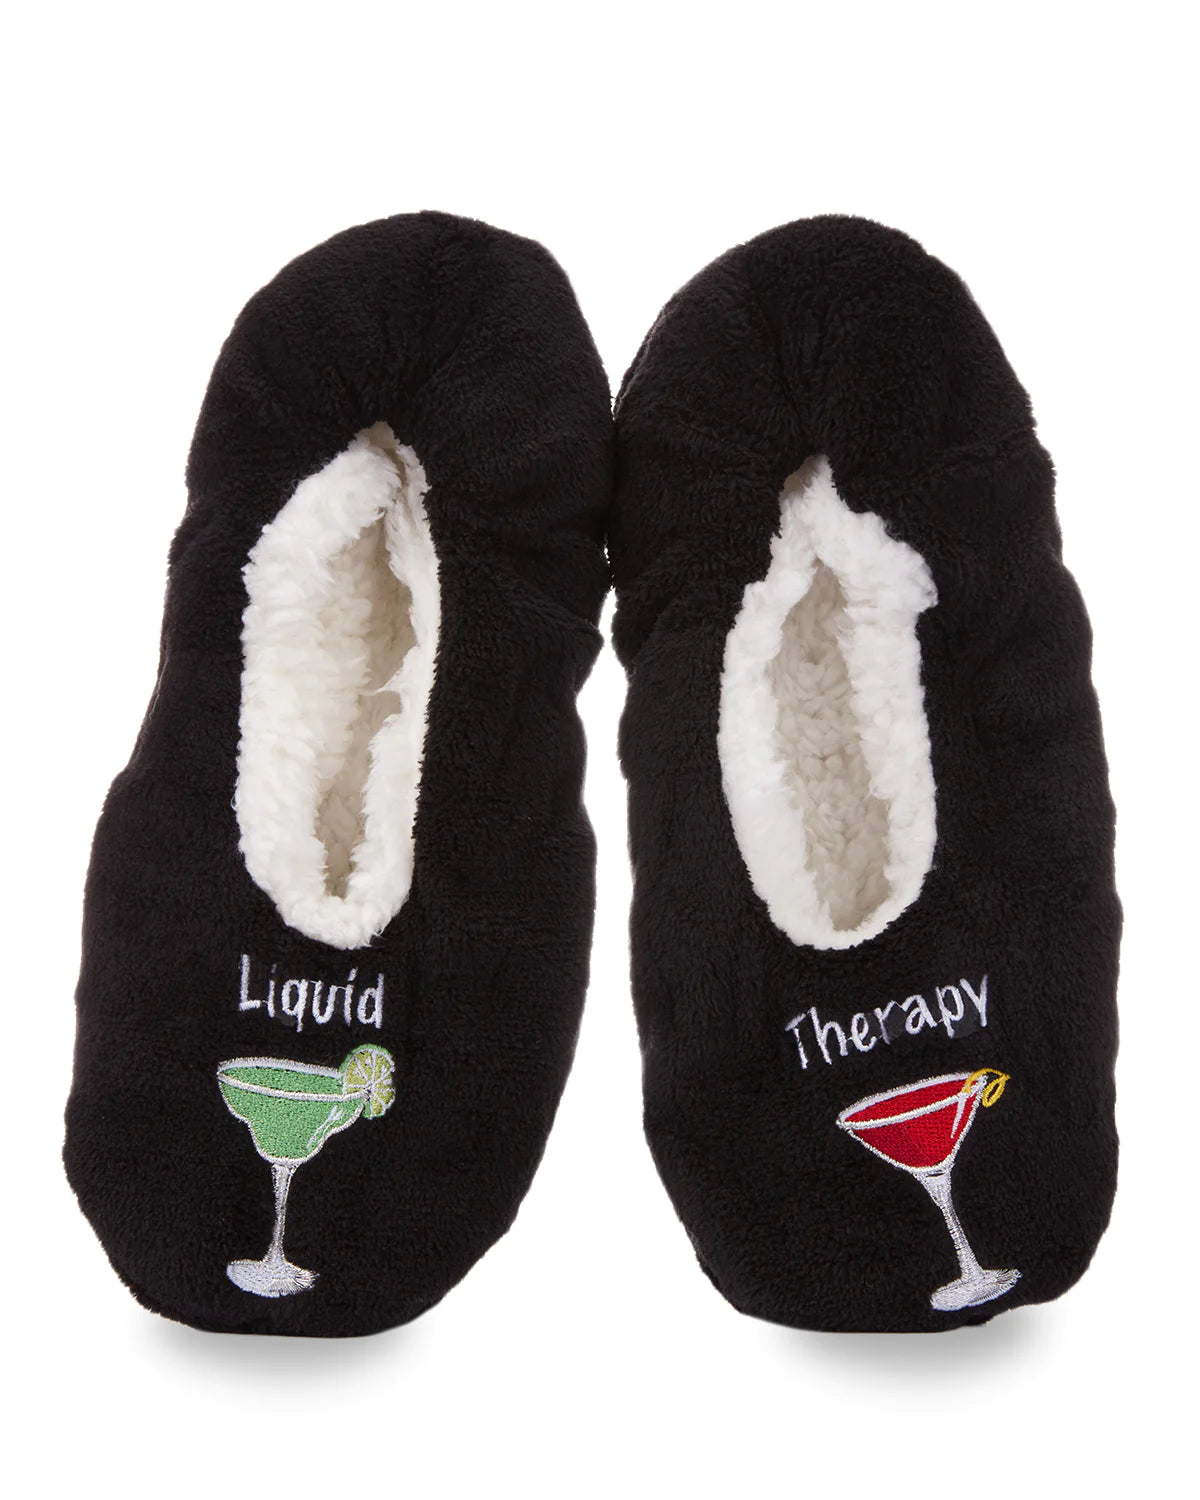 Slip on Slippers | Liquid Therapy